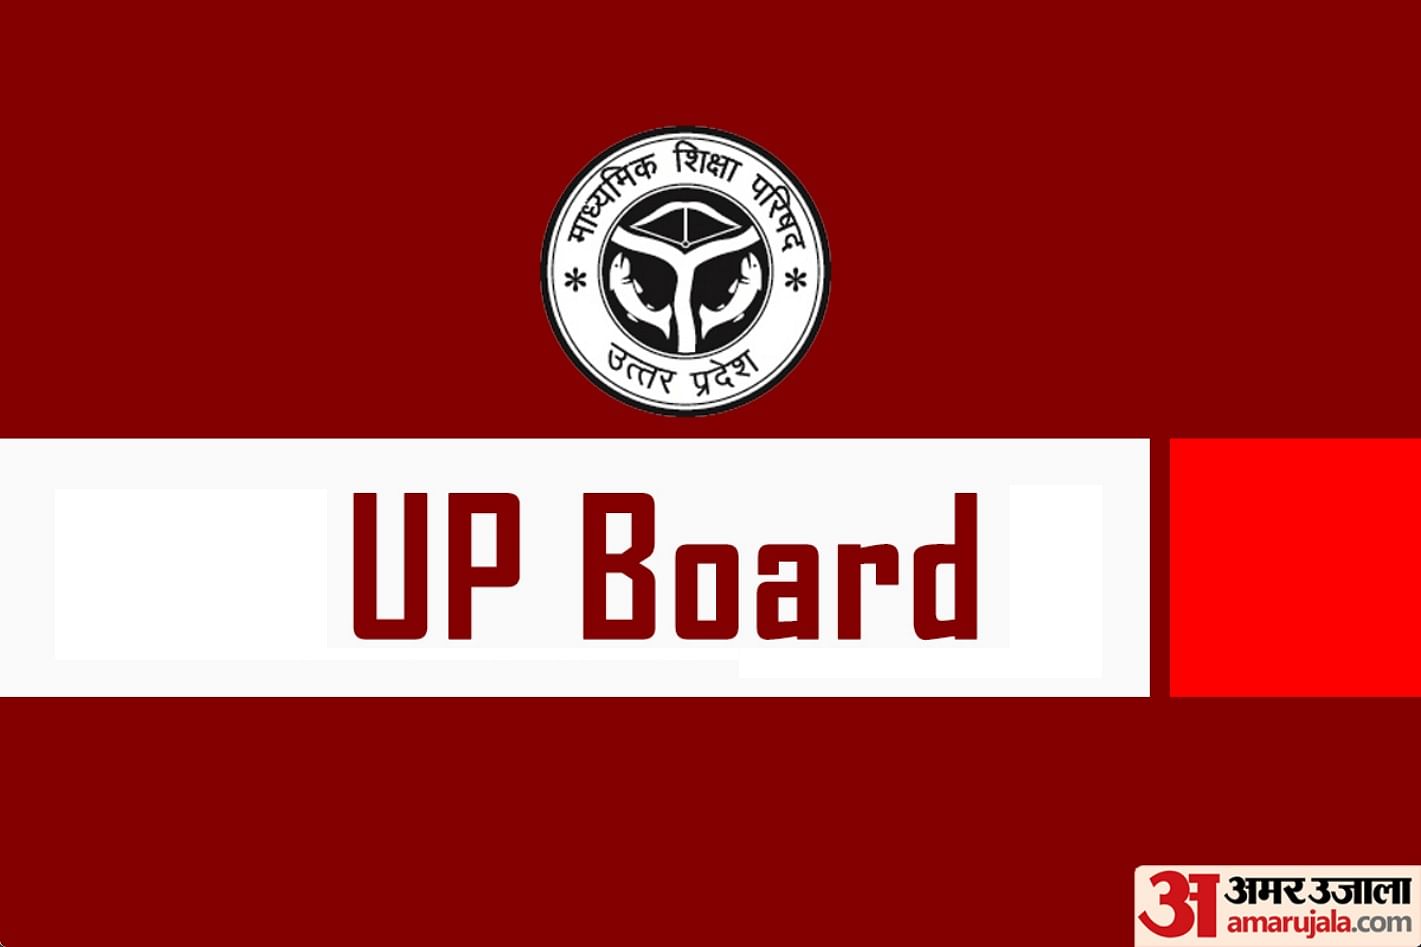 UP Board Academic Calendar 2022-23 Released, Know New Exam Pattern for Class 9 and 10 Here